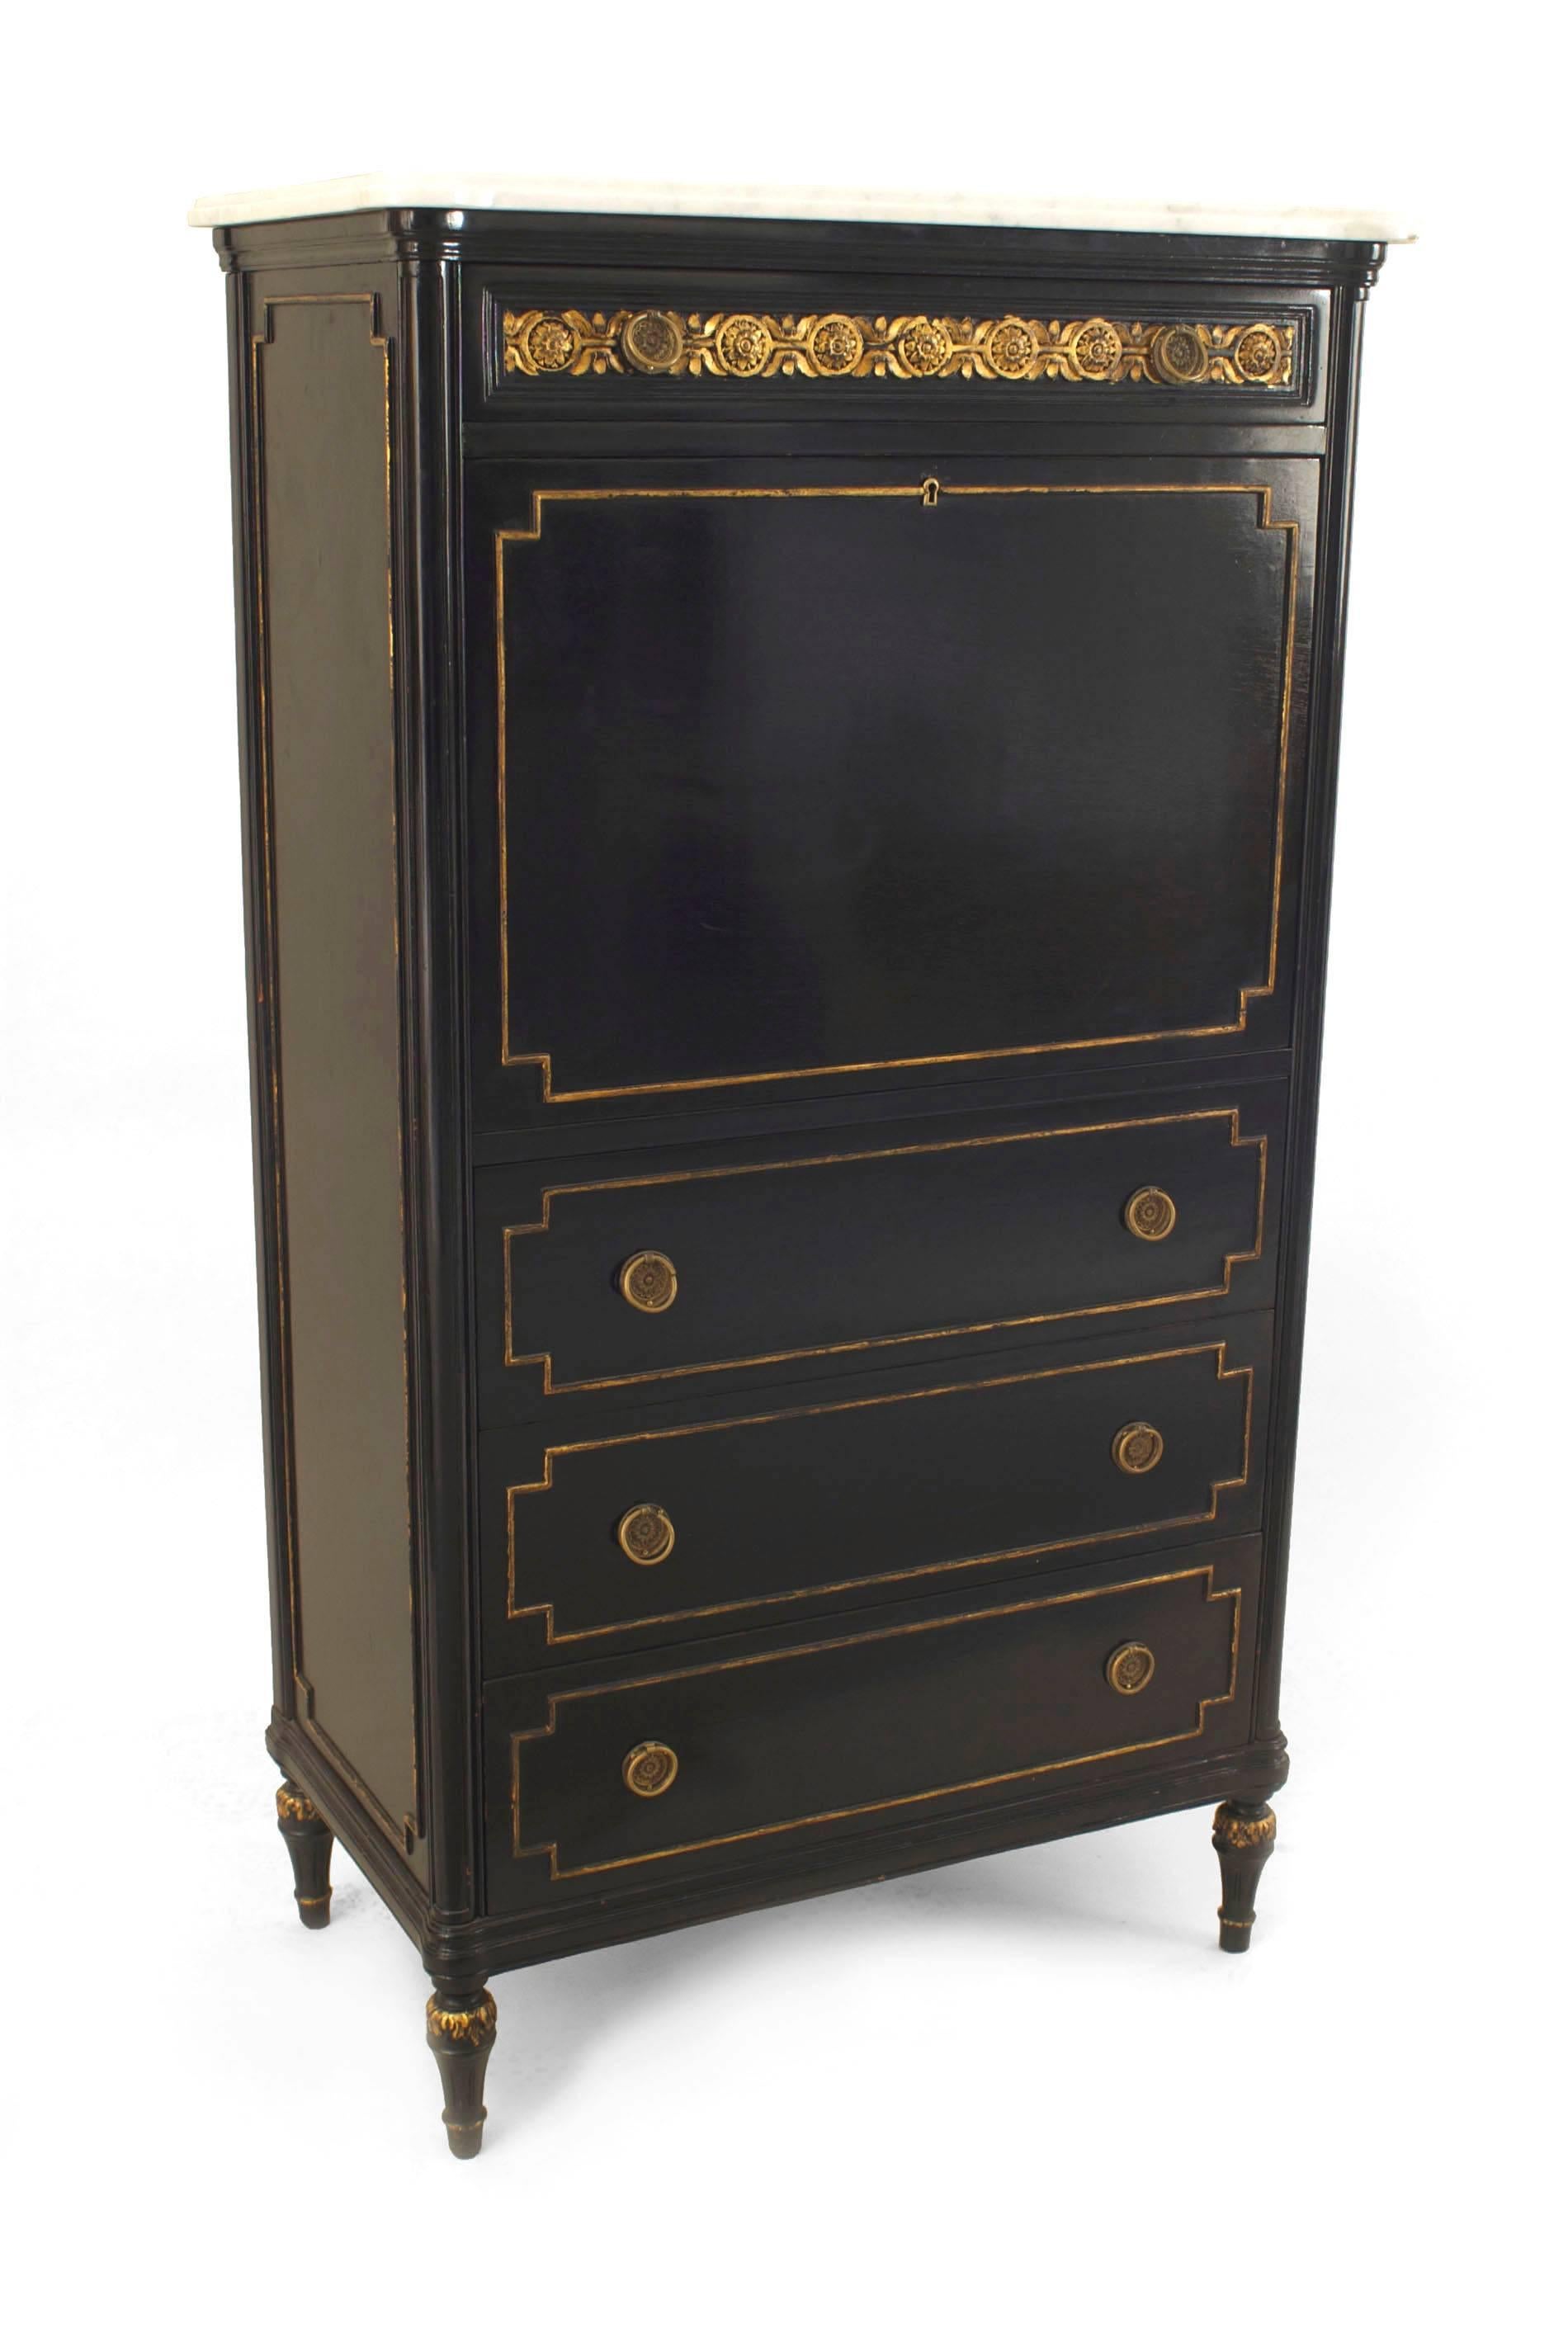 French Louis XVI-style (1940s) ebonized & bronze trim abbatant form desk with a drop front interior above 3 drawers and below a narrow drawer with a bronze design panel. (stamped: JANSEN)
